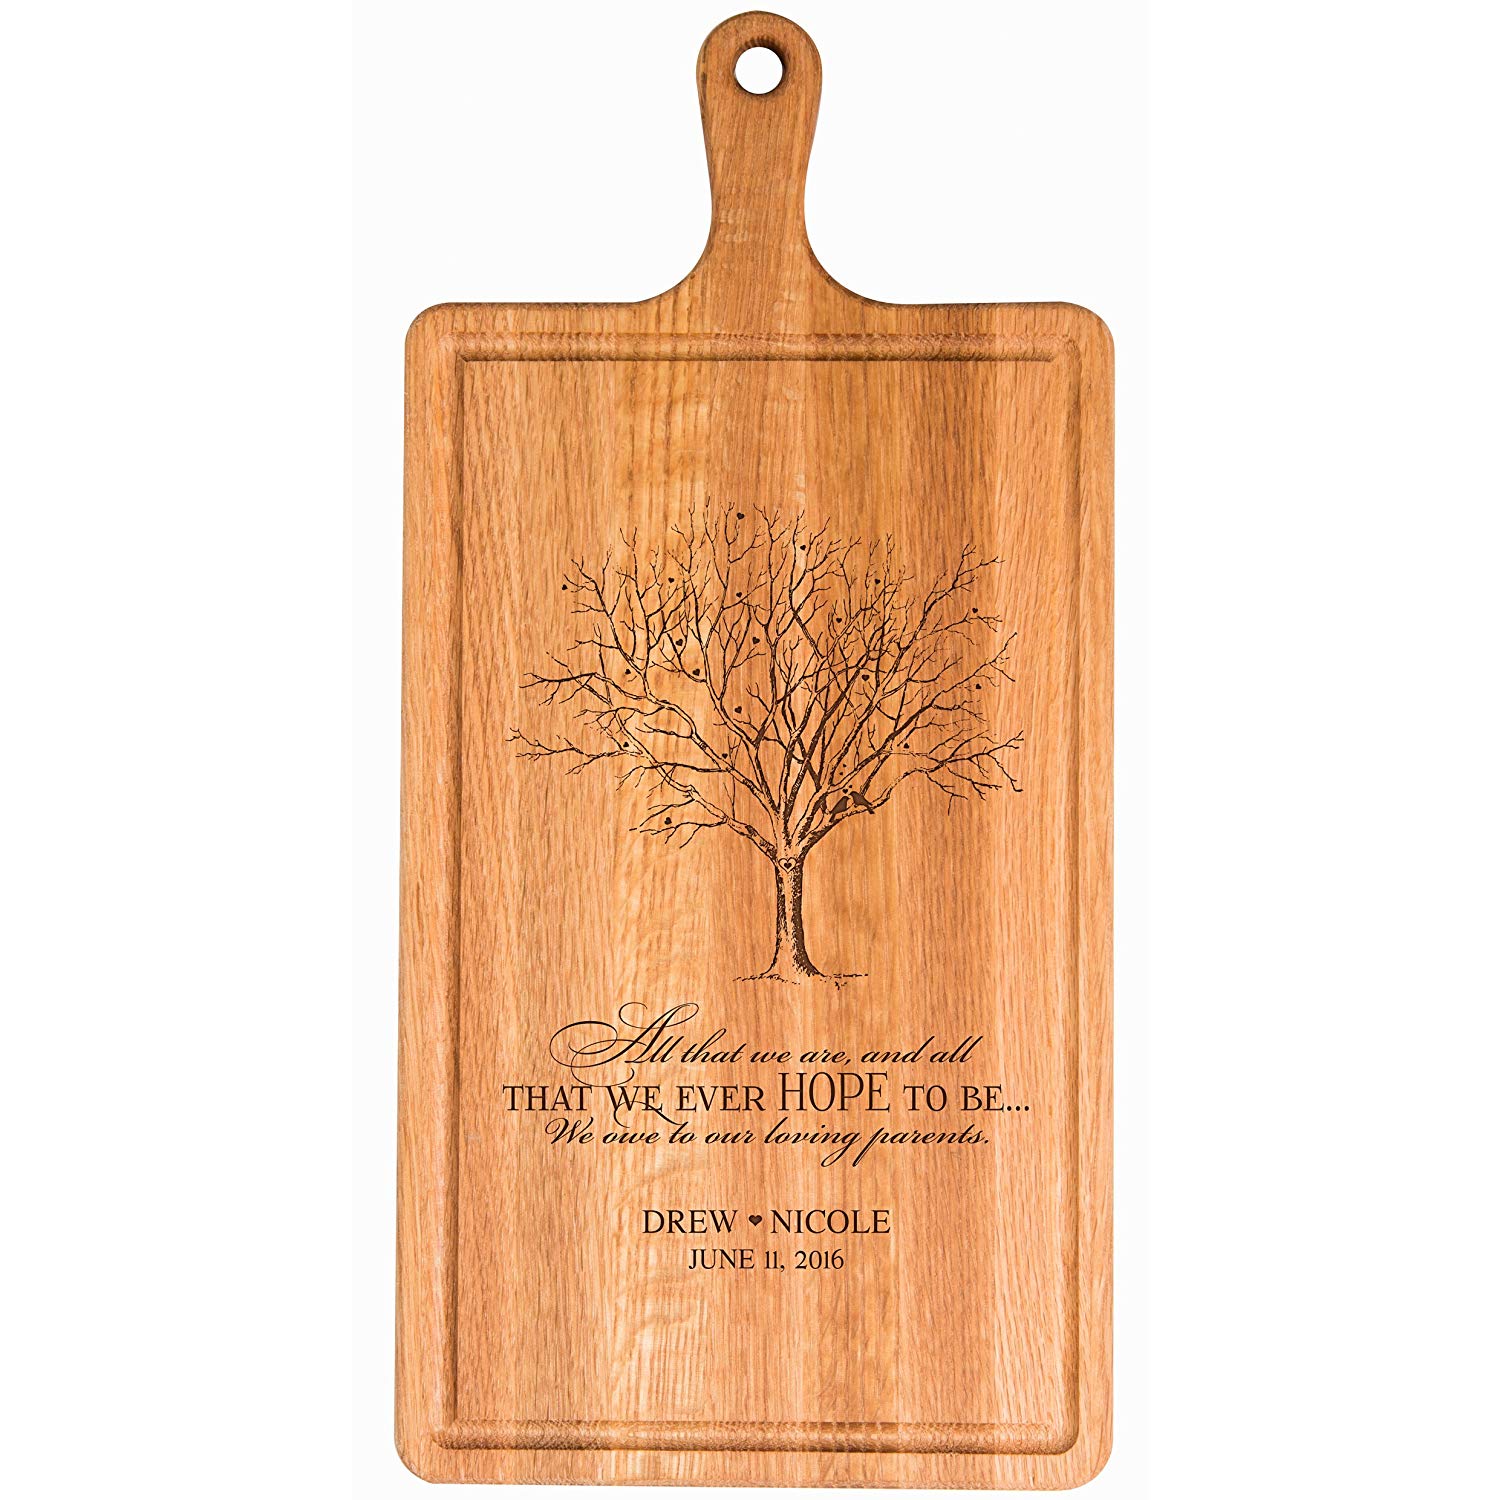 Personalized Family Wedding Cutting Board Gift - All That We Are - LifeSong Milestones